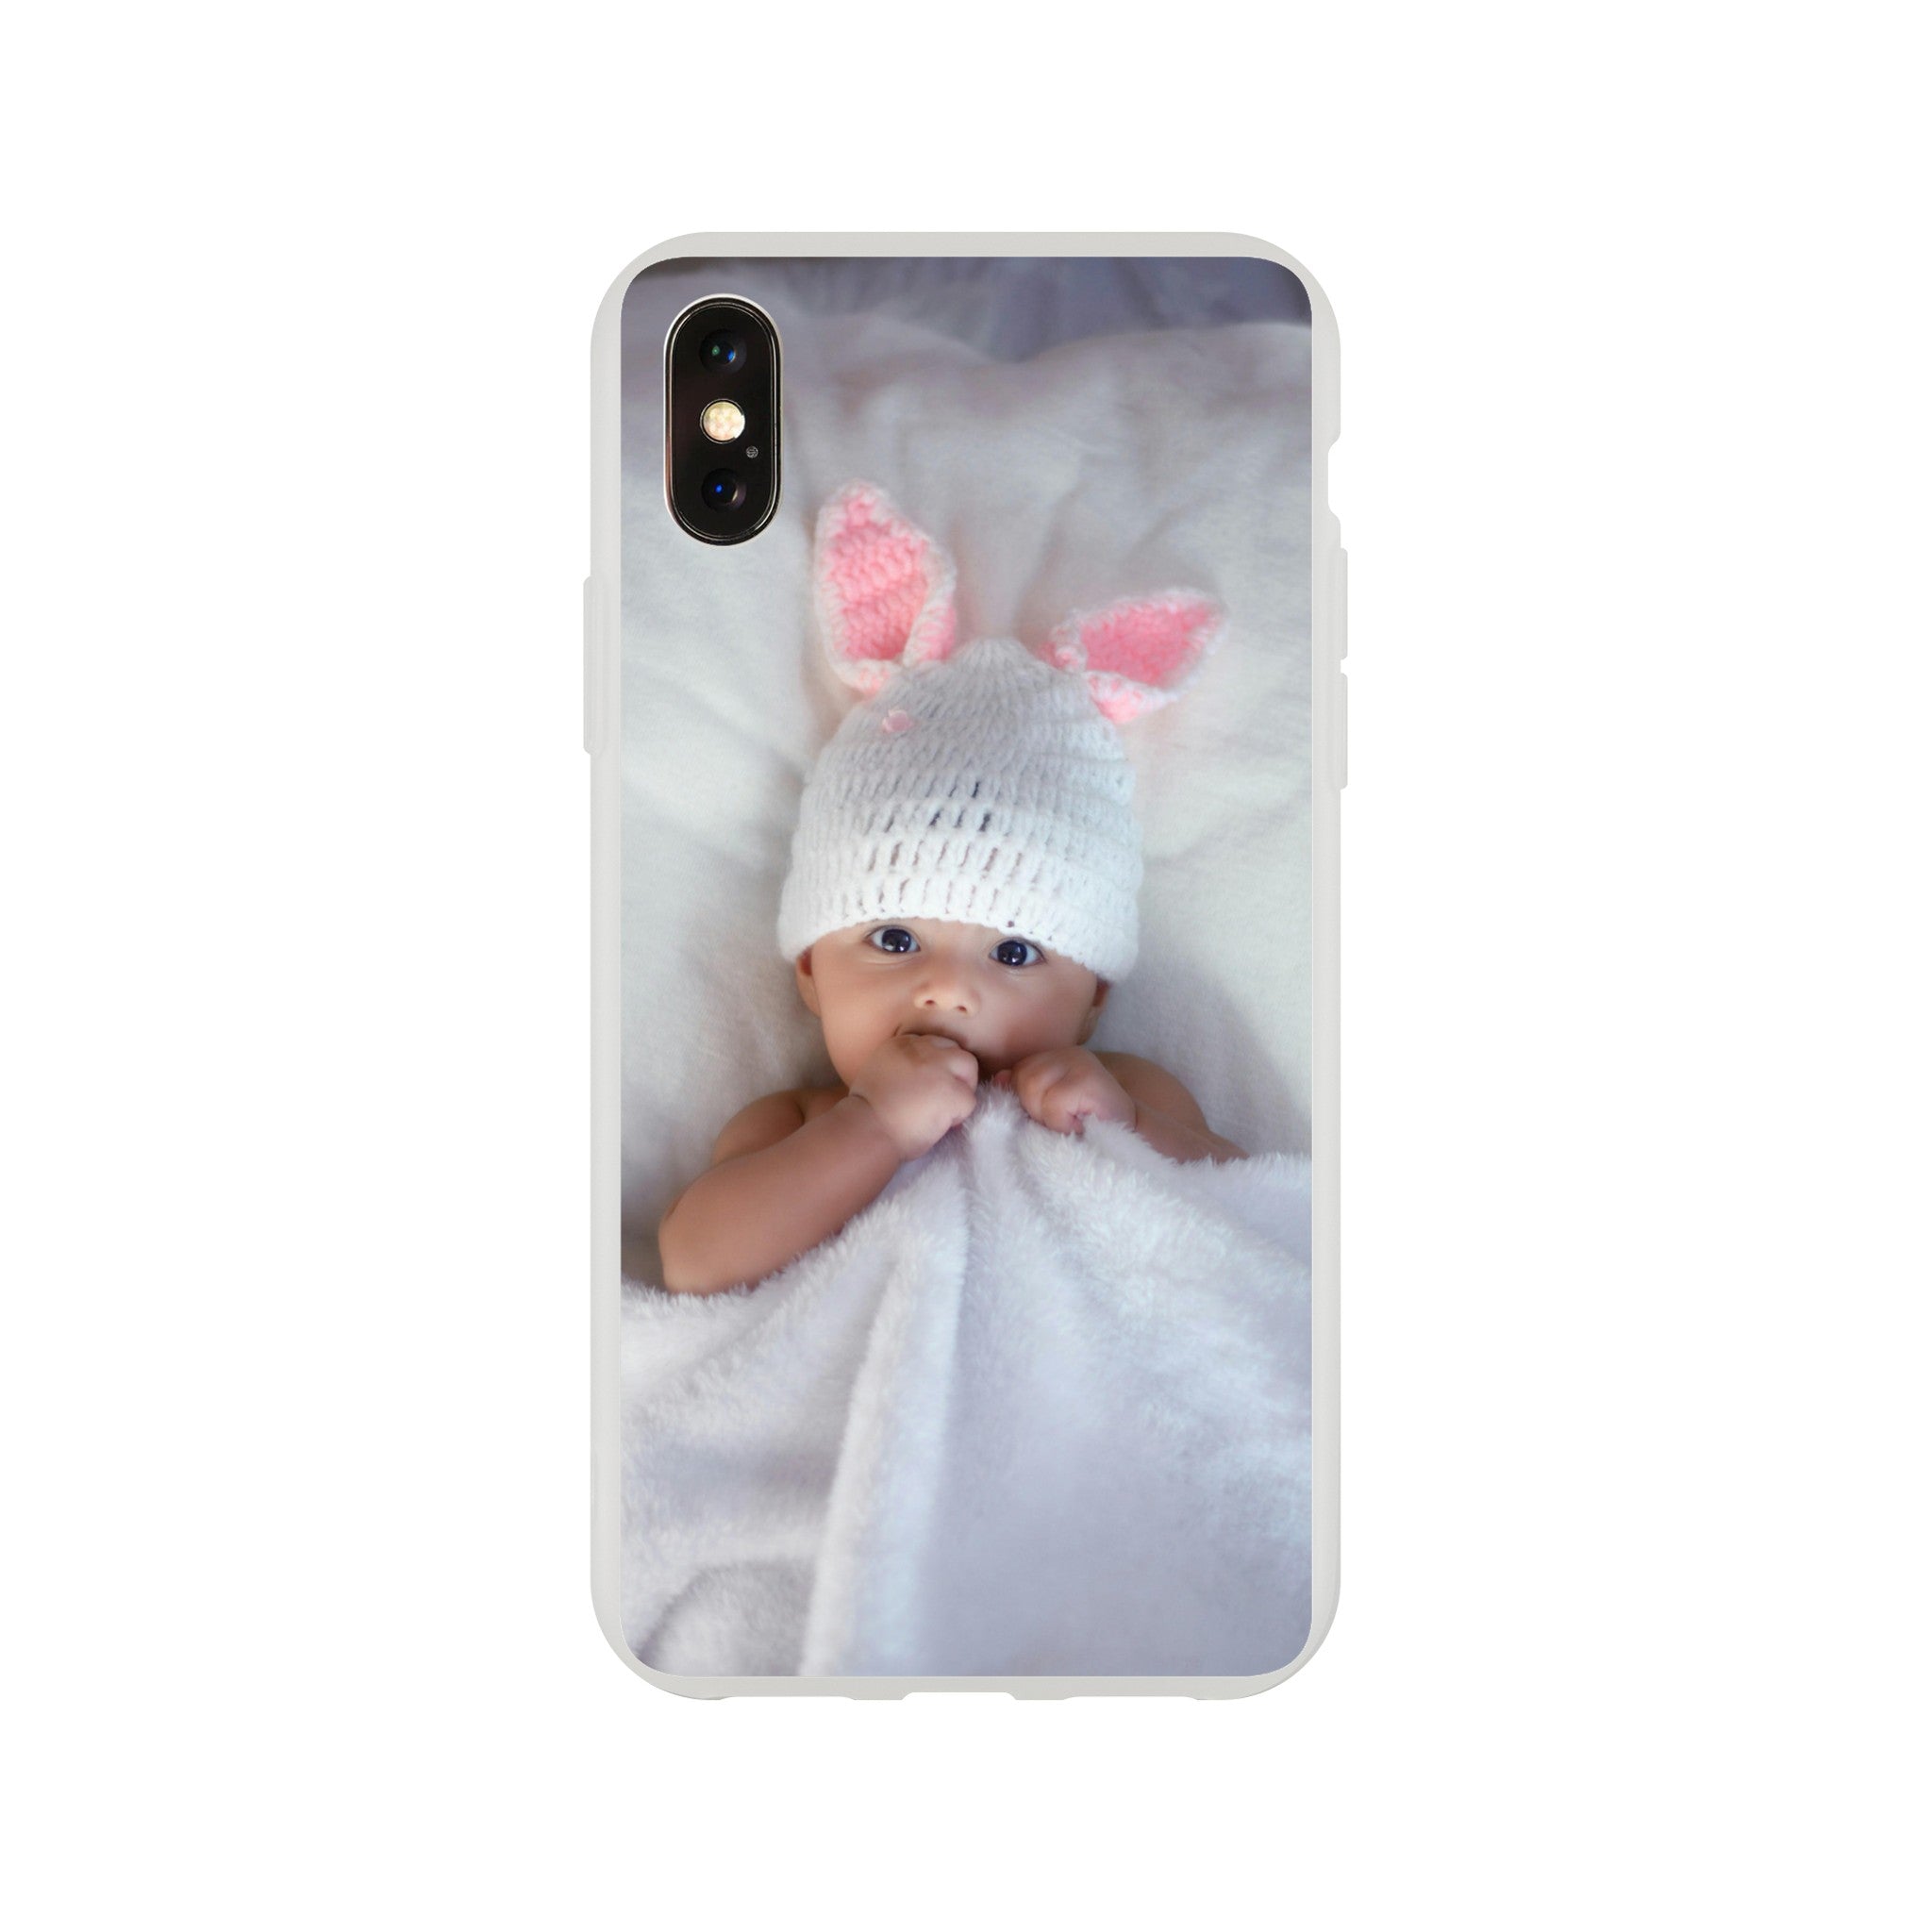 Personalized iPhone Flexi case